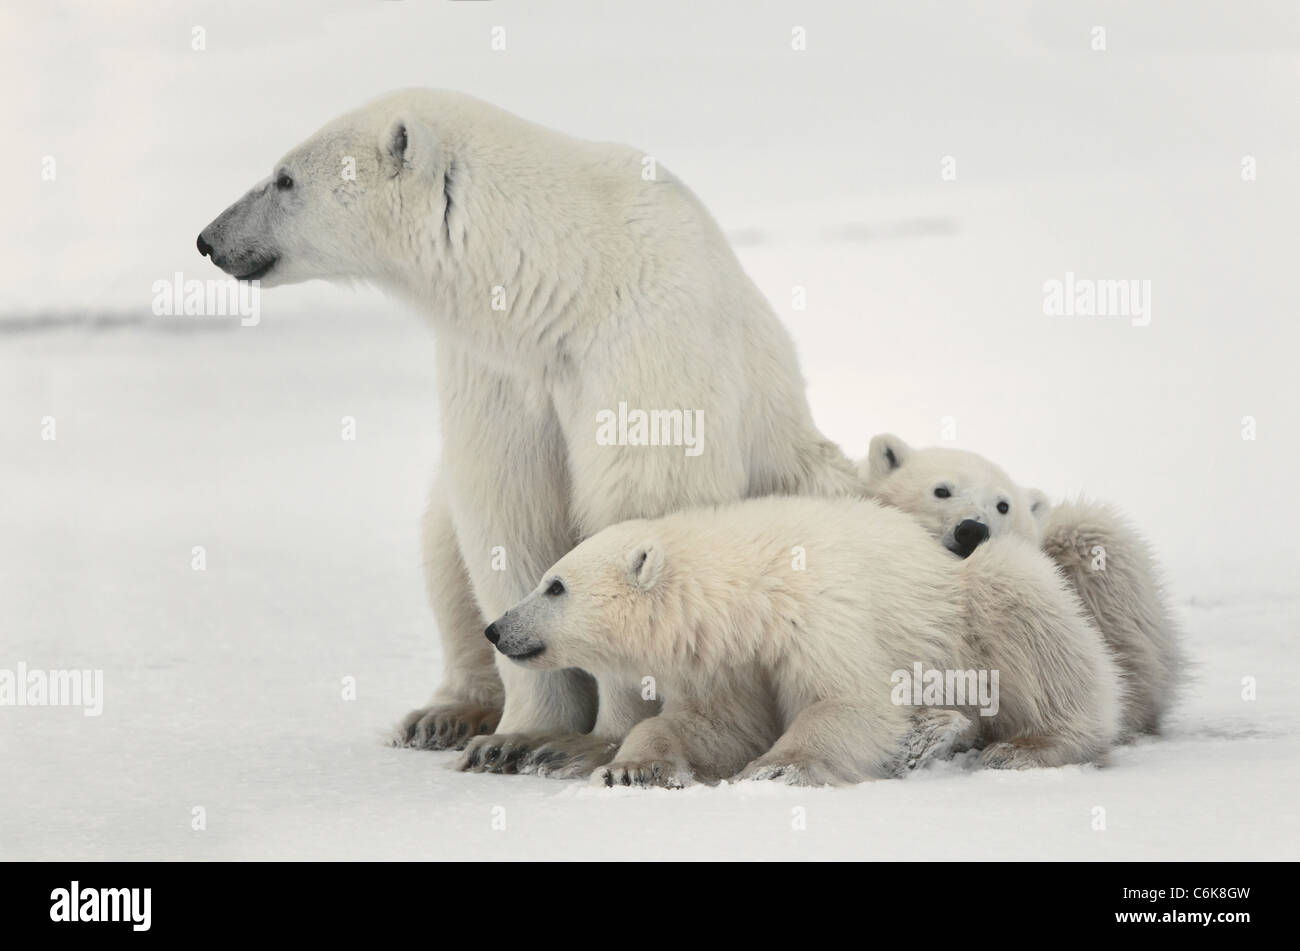 White she-bear with cubs. A Polar she-bear with two small bear cubs. Around snow. Stock Photo